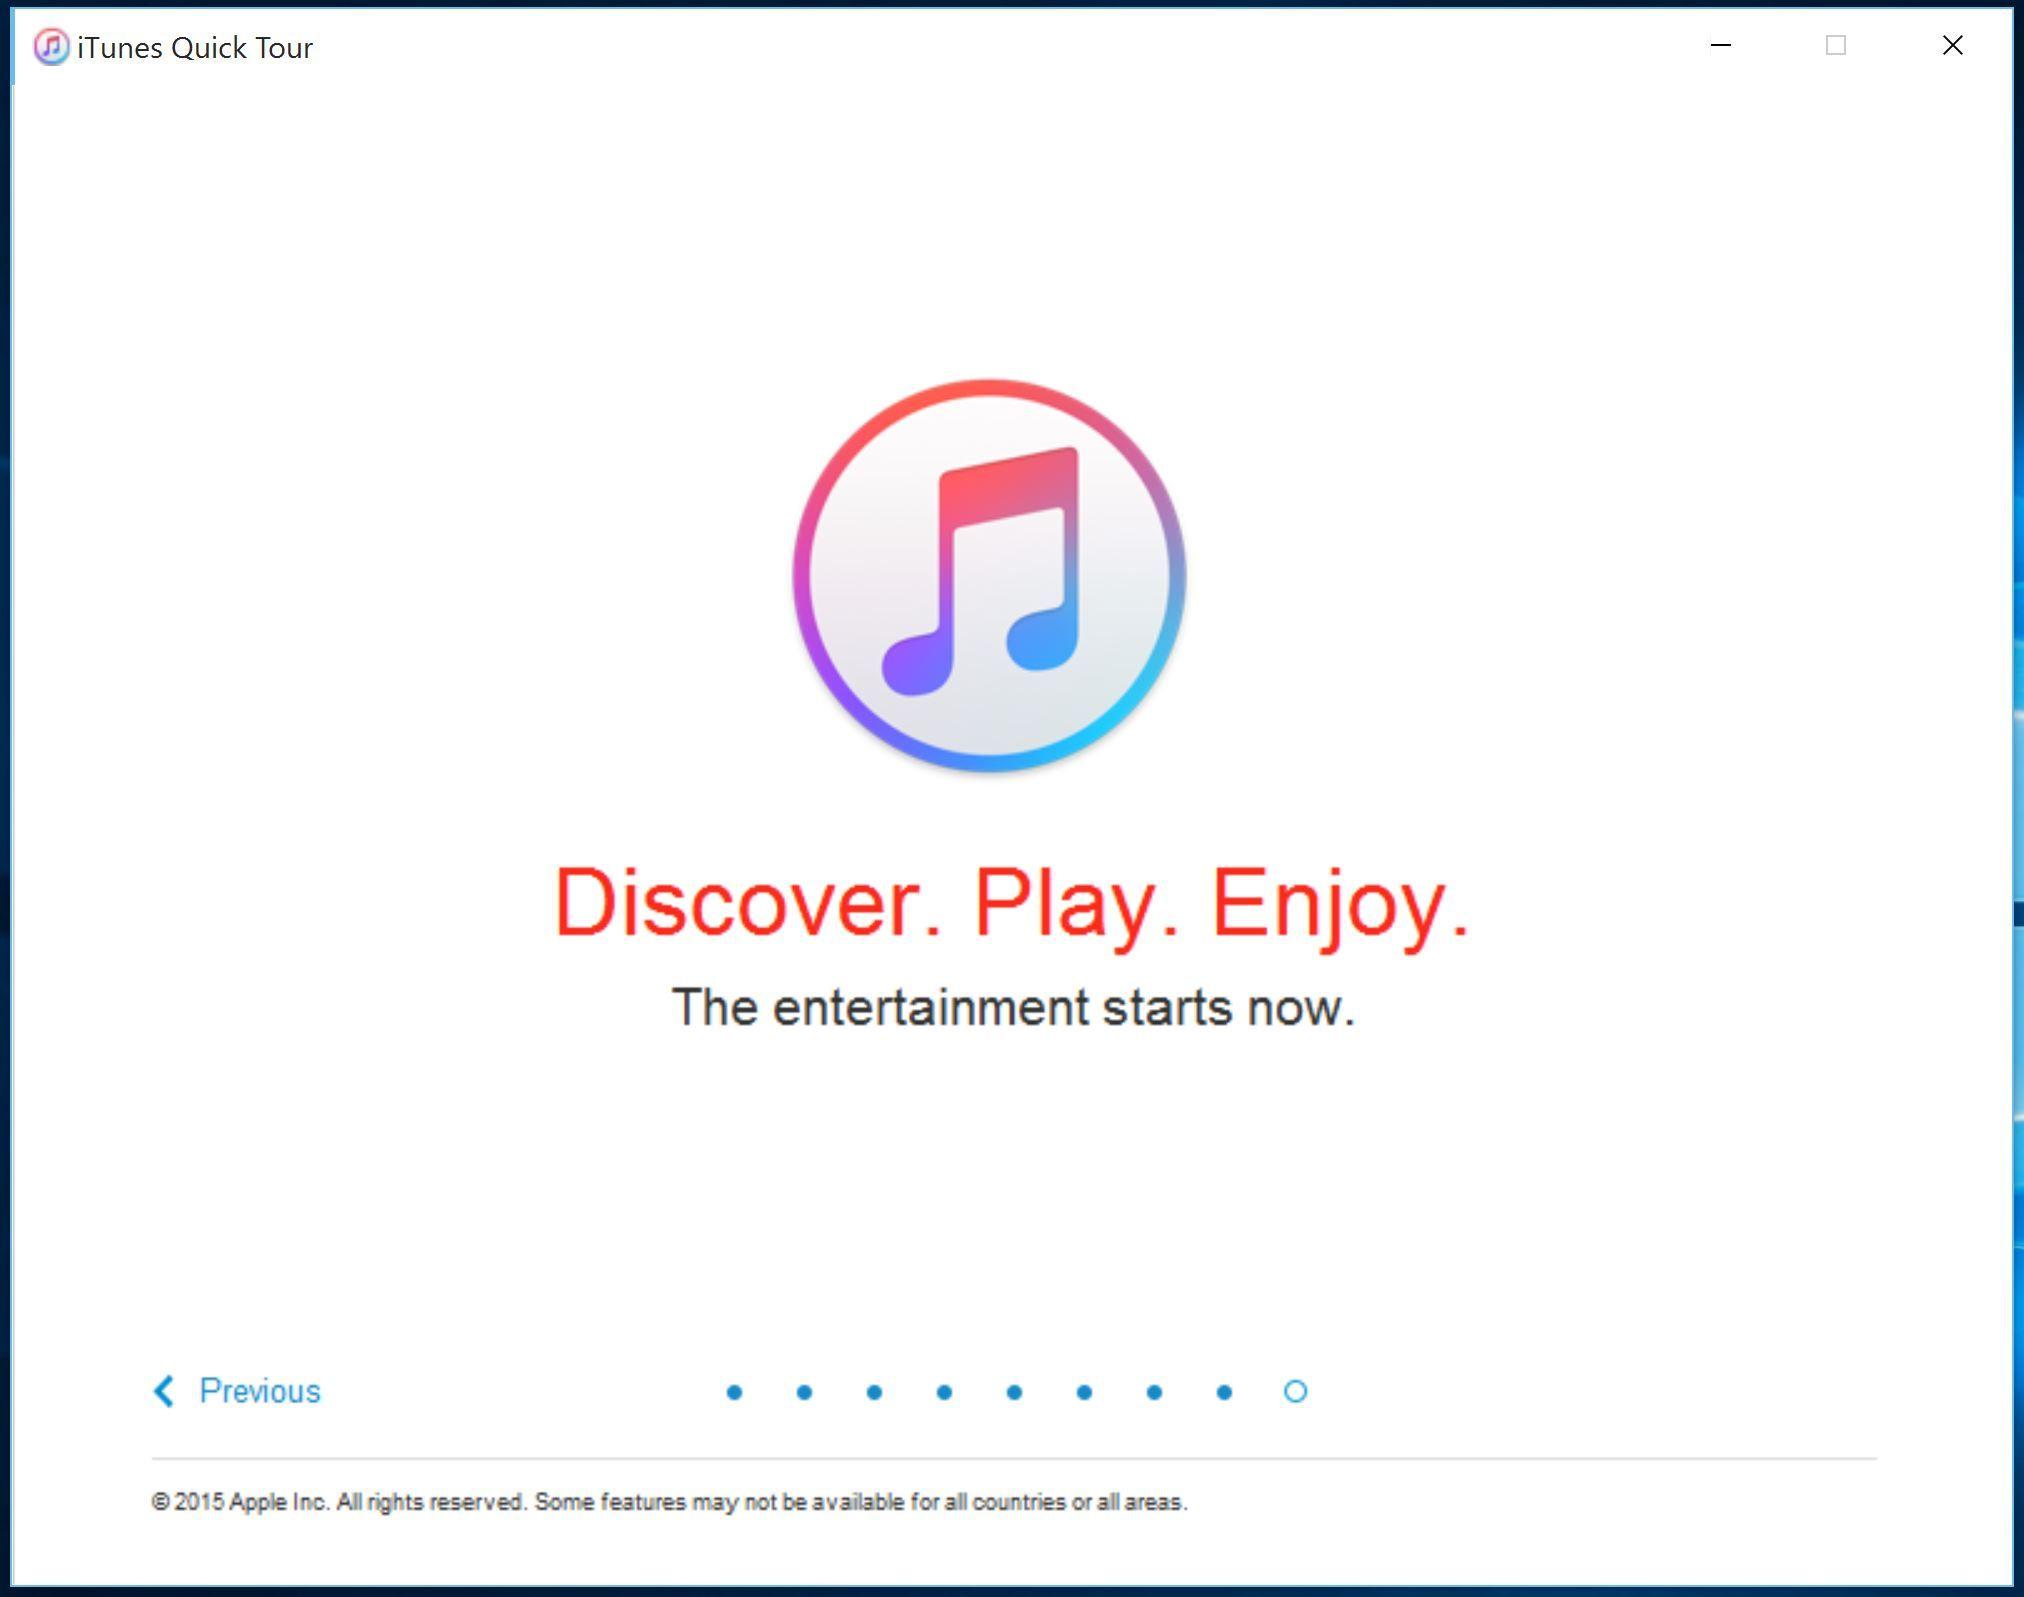 iTunes Windows 8 Logo - Take A Look At The New iTunes 12.2 For Windows From Apple